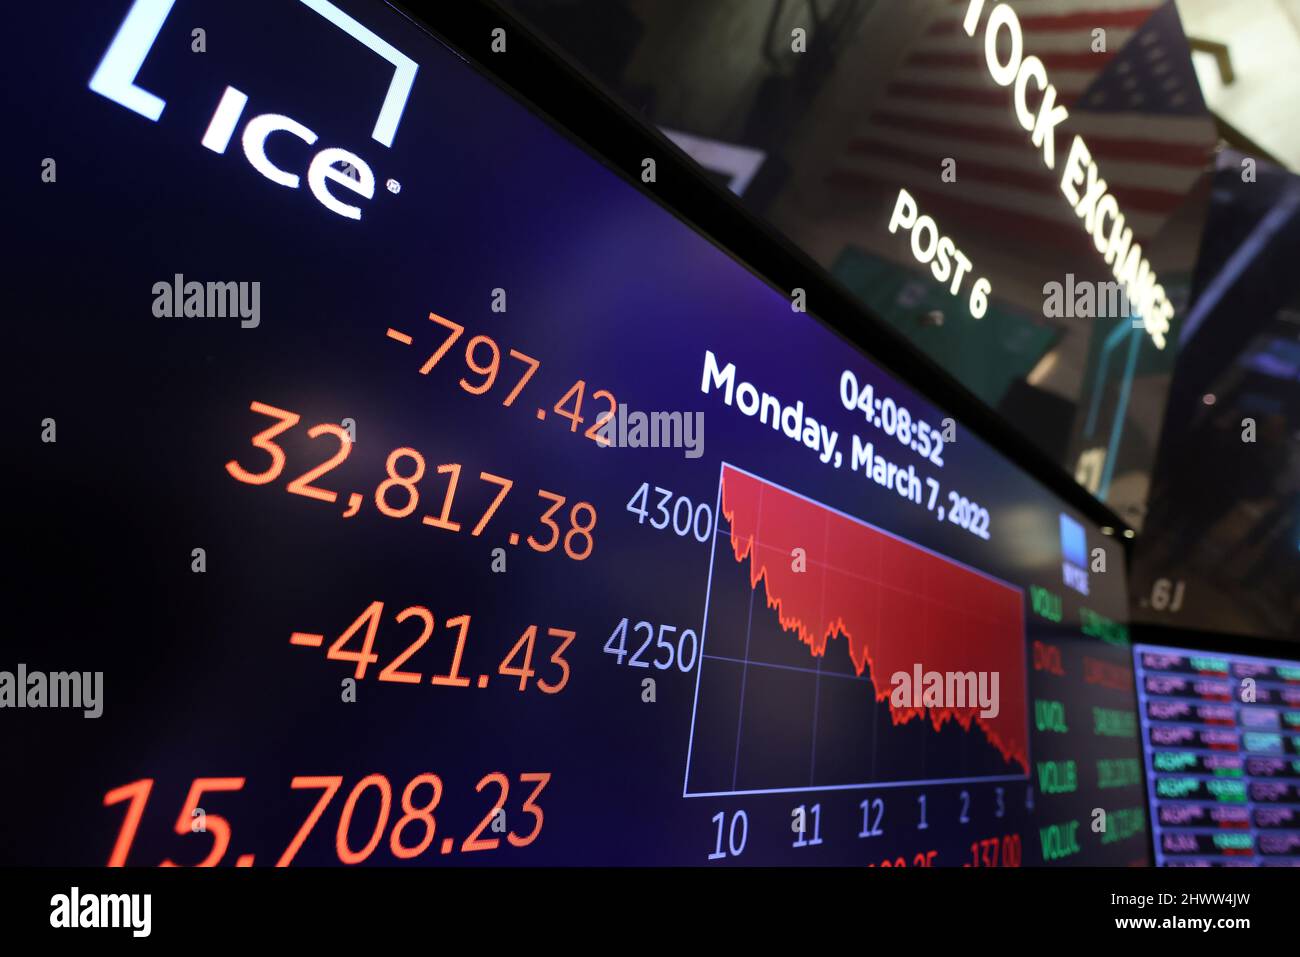 The Dow Jones Industrial Average (DJI) is displayed on the trading floor  after the closing bell at the New York Stock Exchange (NYSE) in Manhattan,  New York City, U.S., March 7, 2022.